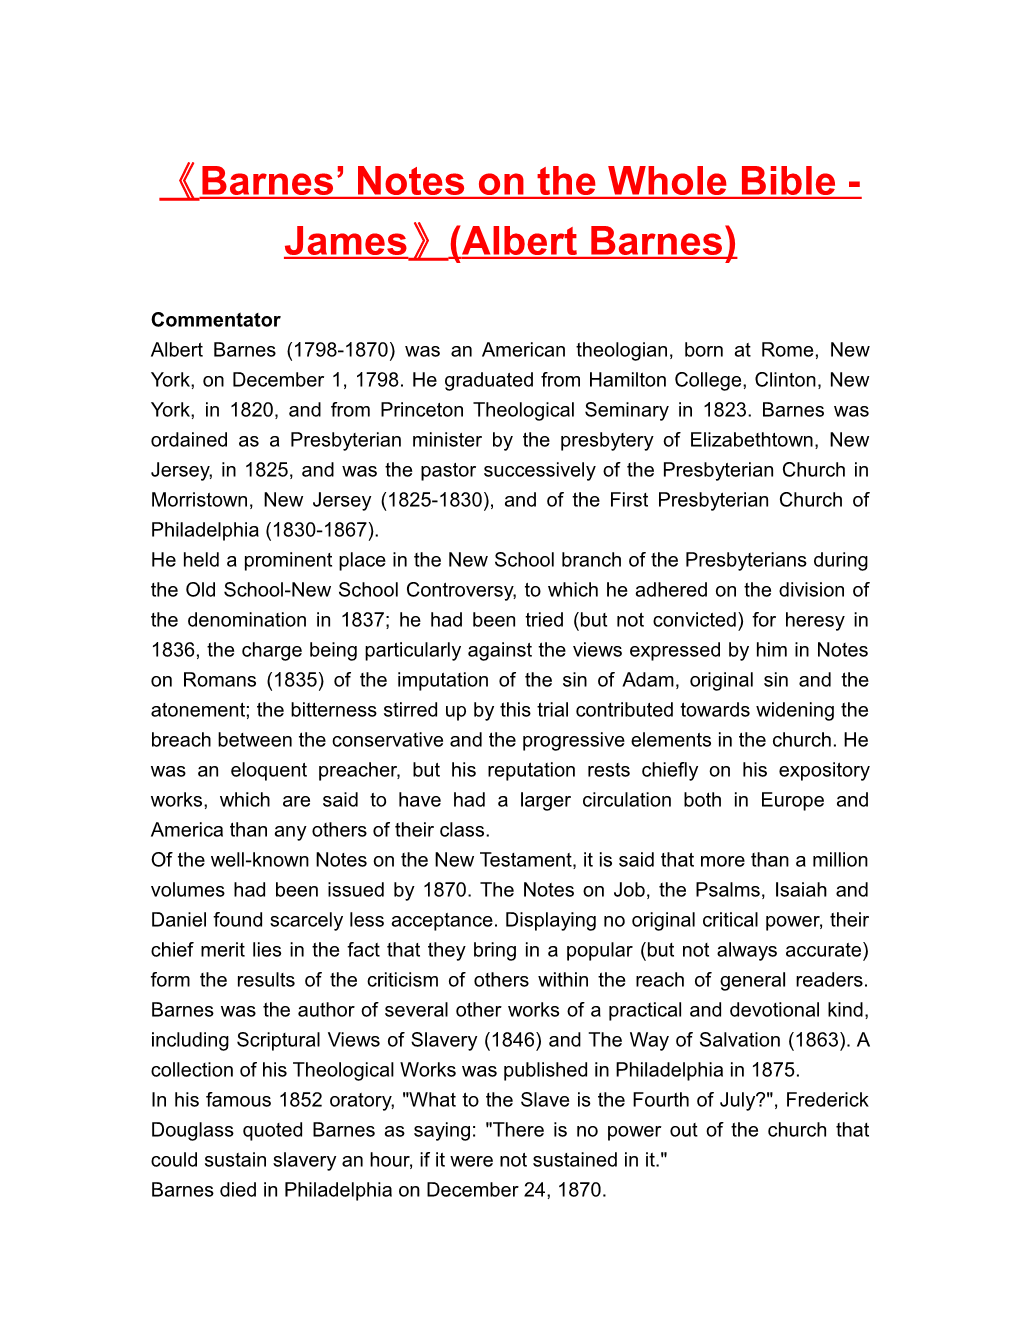 Barnes Notes on the Whole Bible - James (Albert Barnes)